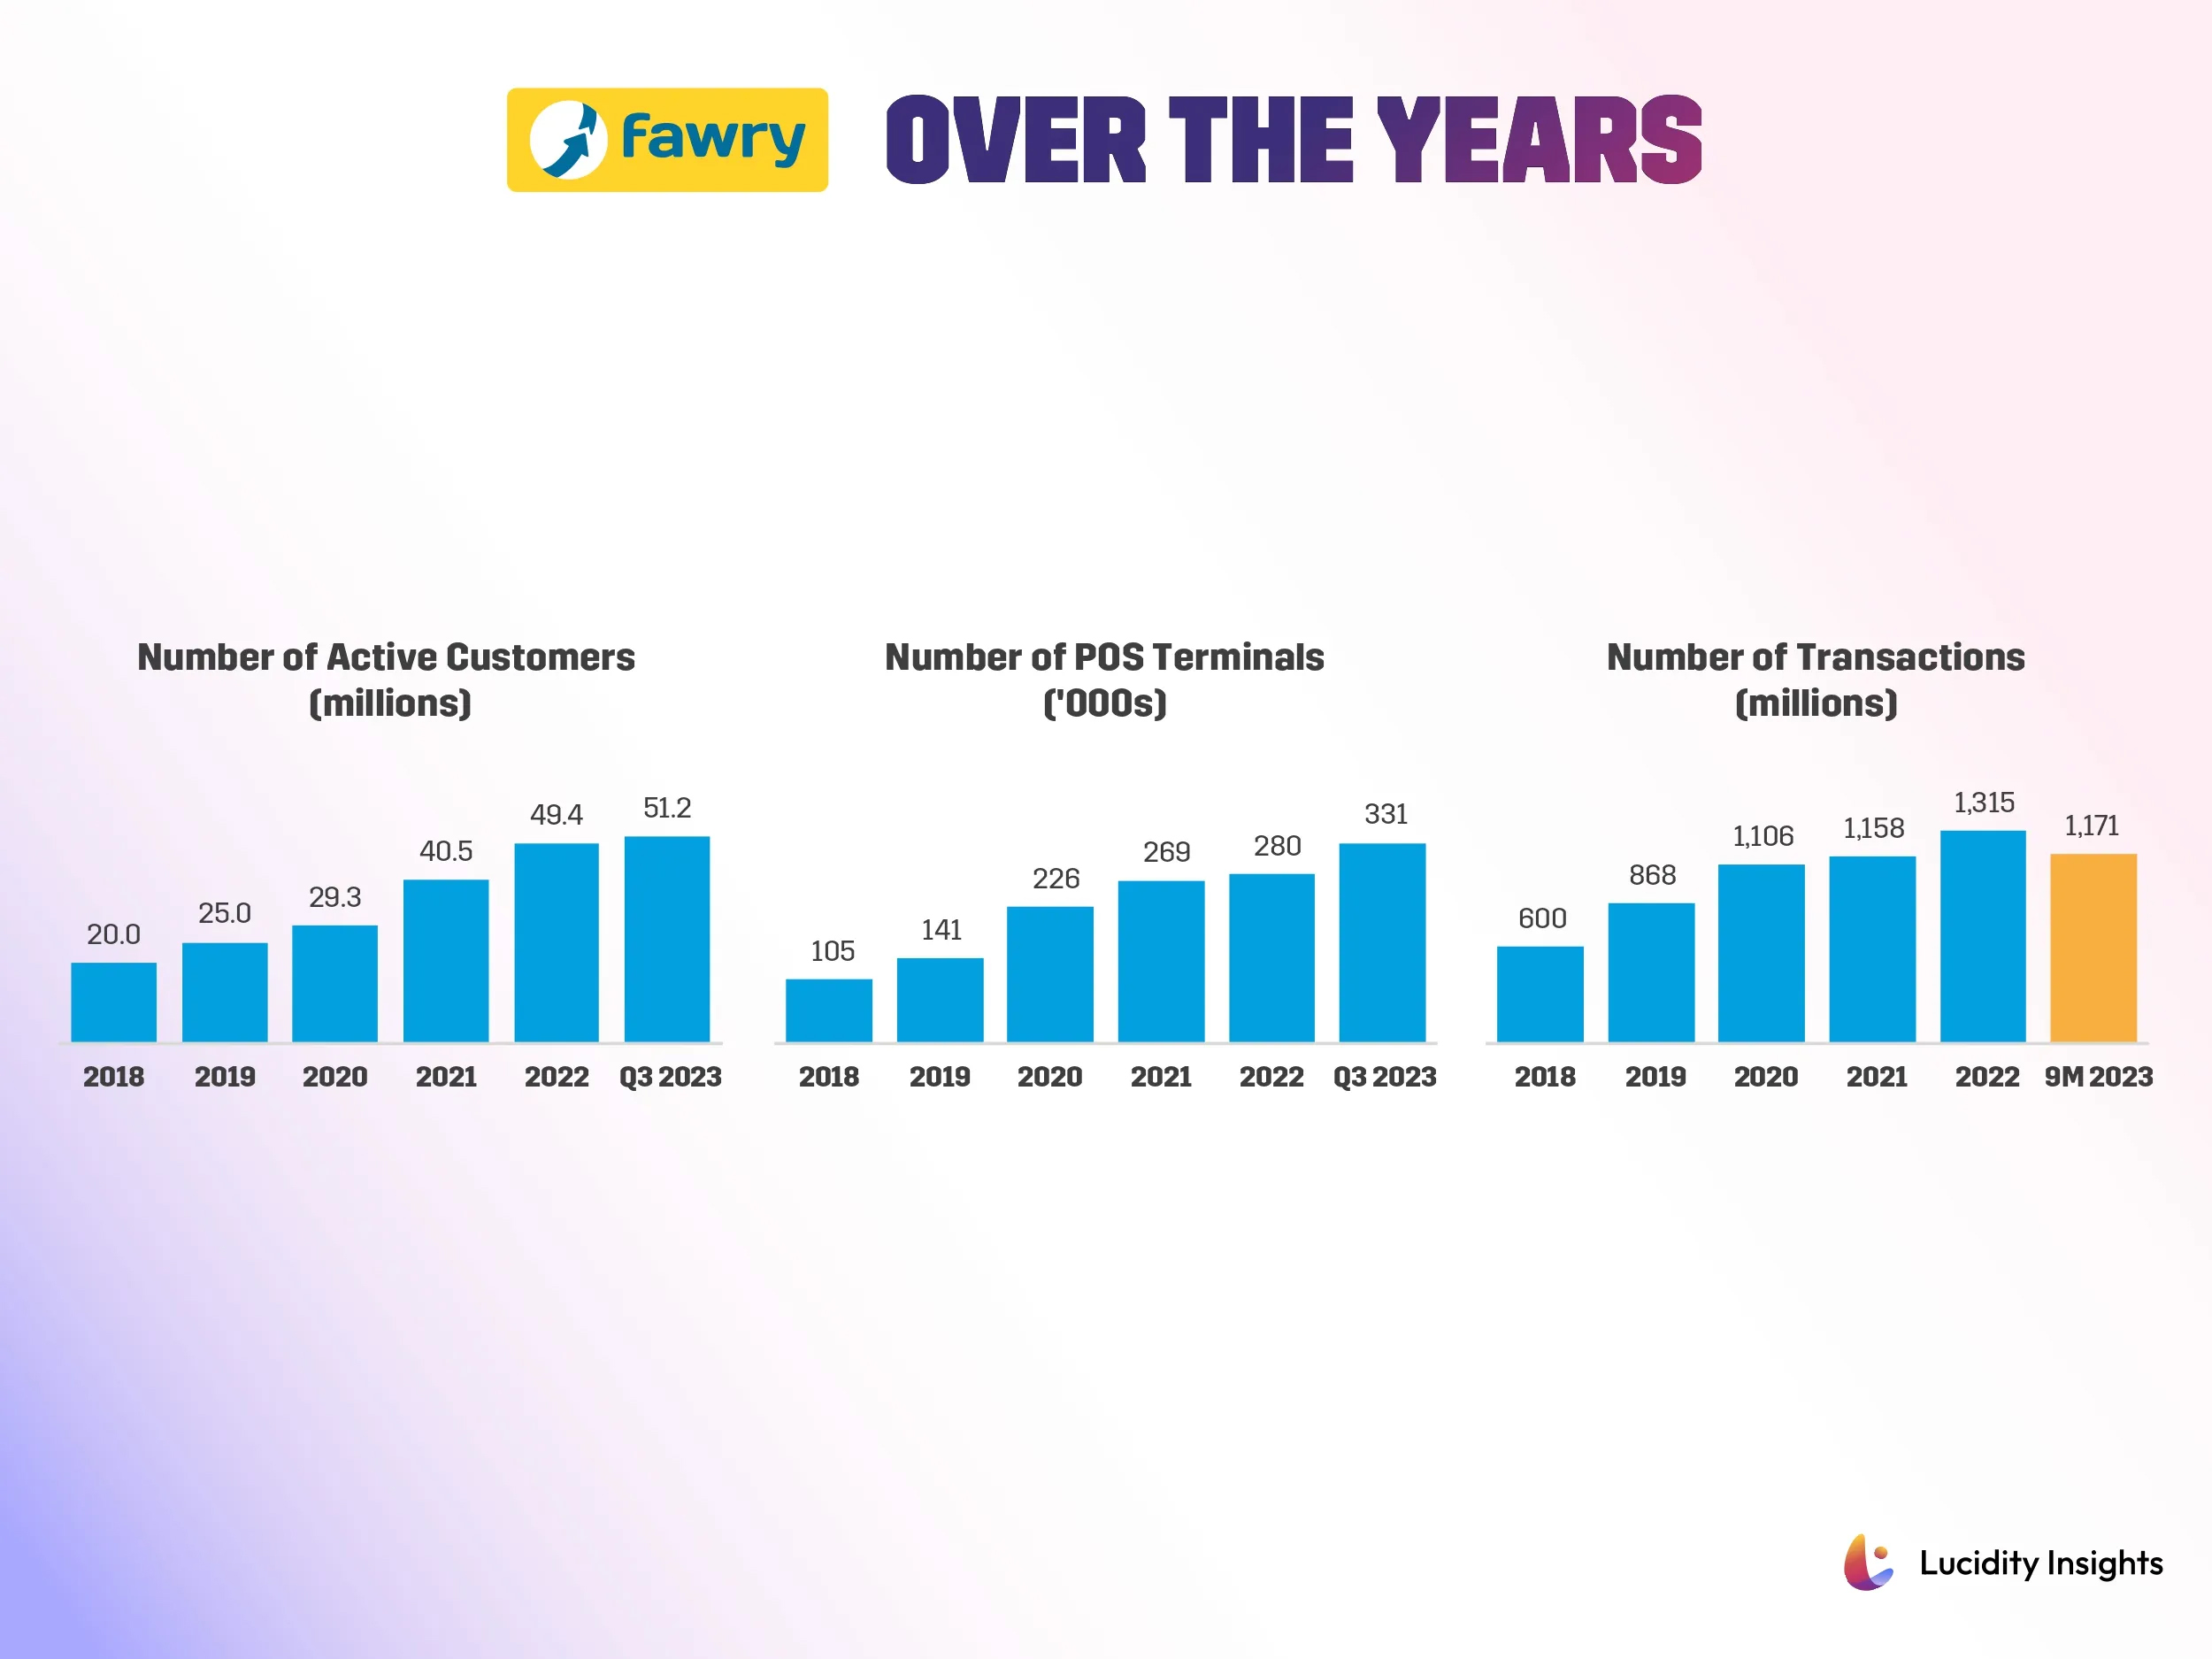 Fawry over the years (2018-2023): Number of Active Customers, Number of POS Terminals, Number of Transactions